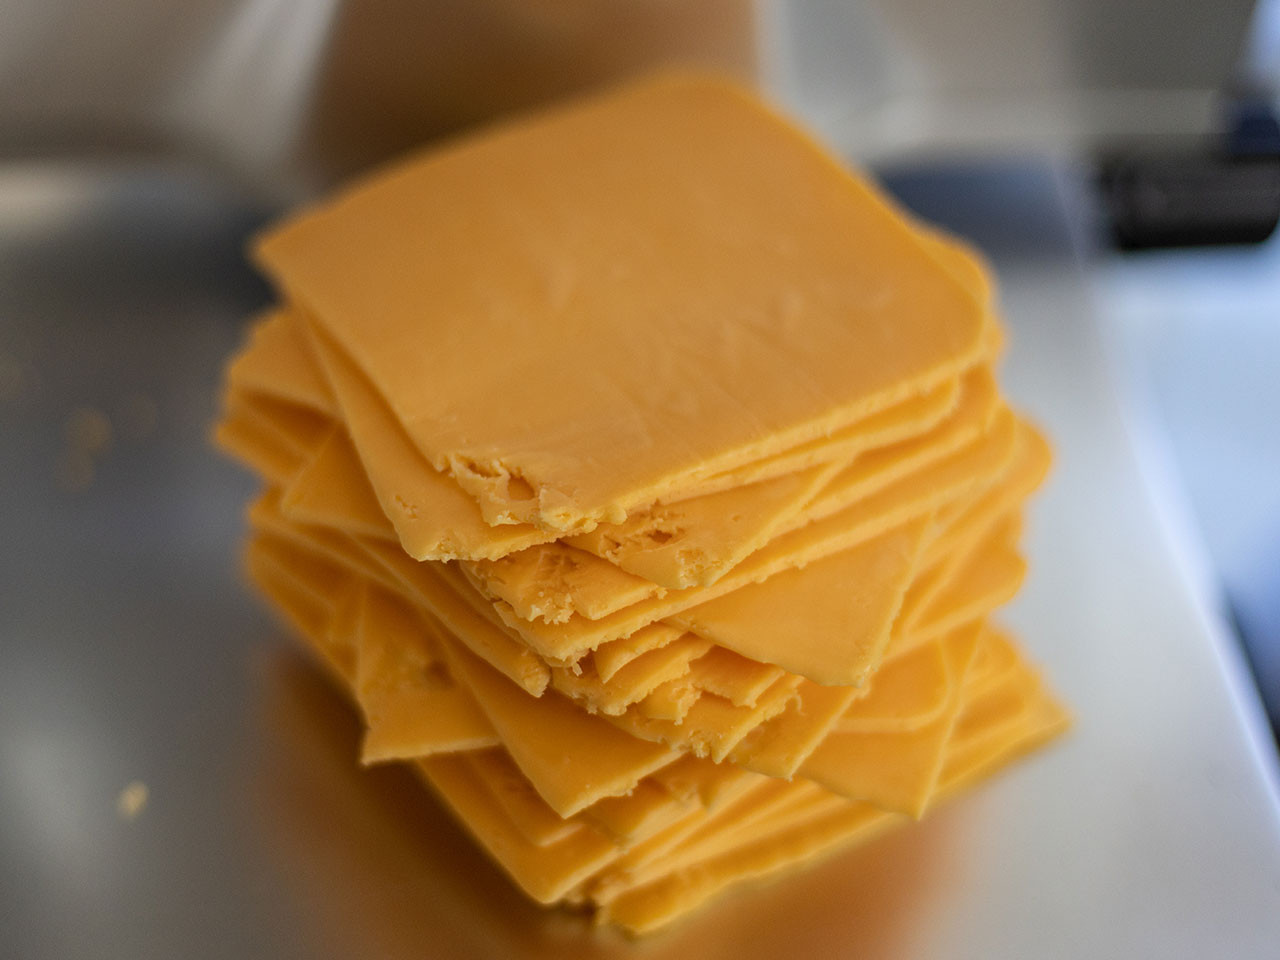 Why Is Cheddar Cheese Orange Sometimes?